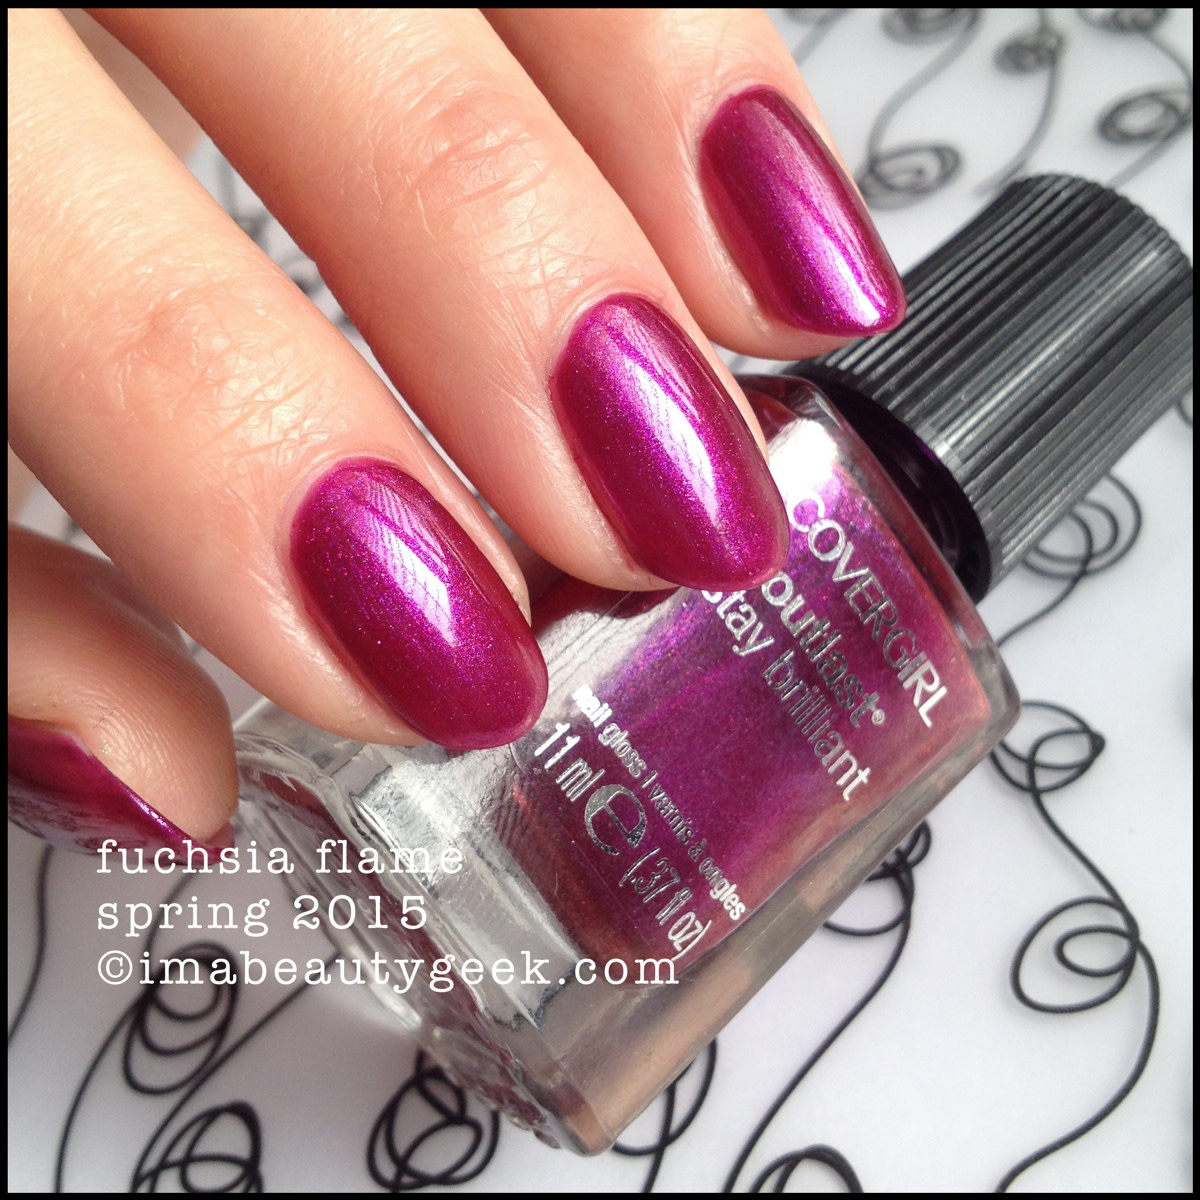 CoverGirl Nails Spring 2015_CoverGirl Fuchsia Flame Outlast